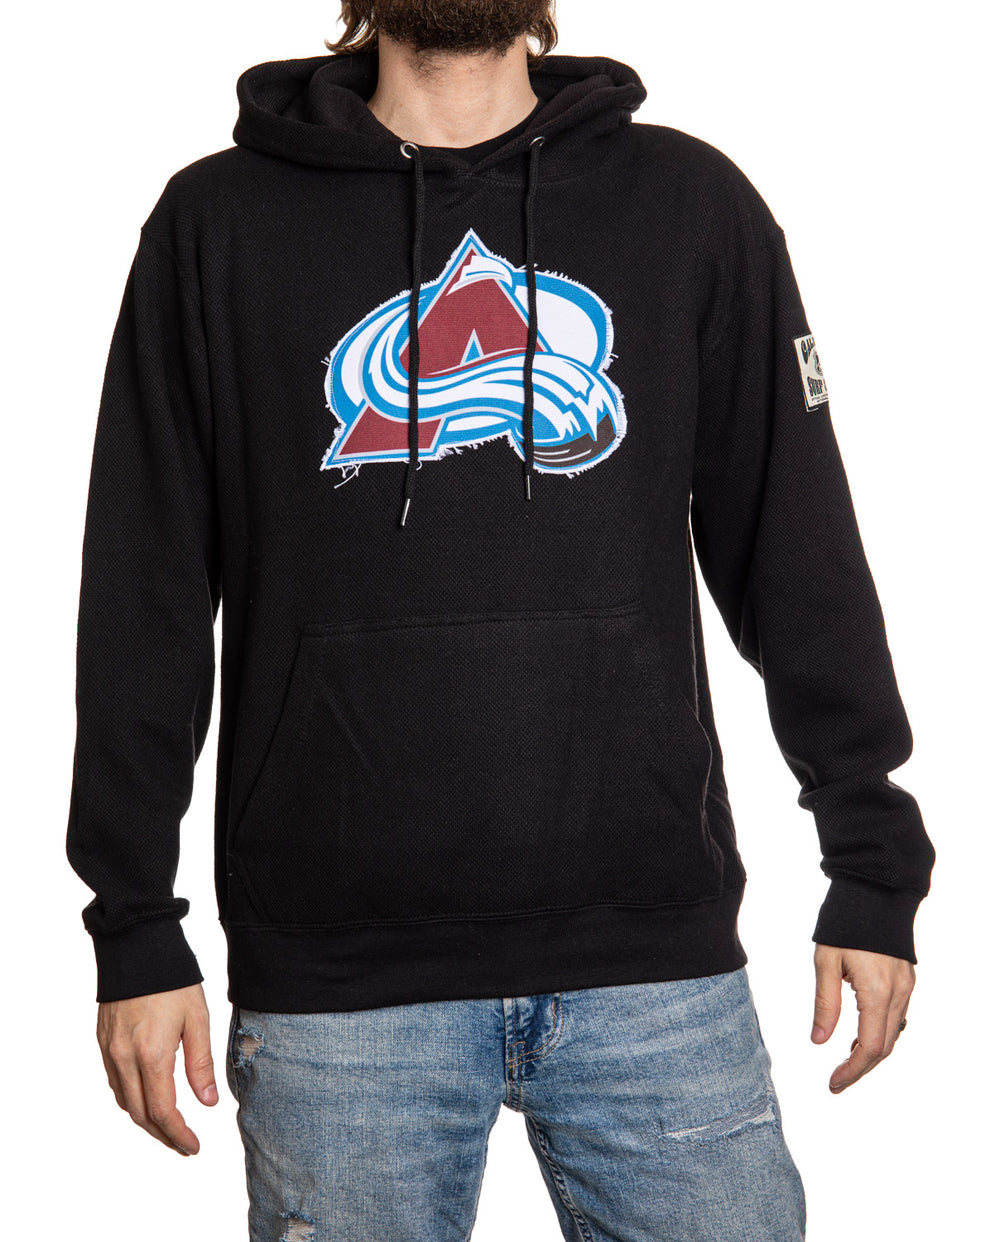 New NHL Colorado Avalanche old time jersey style midweight cotton